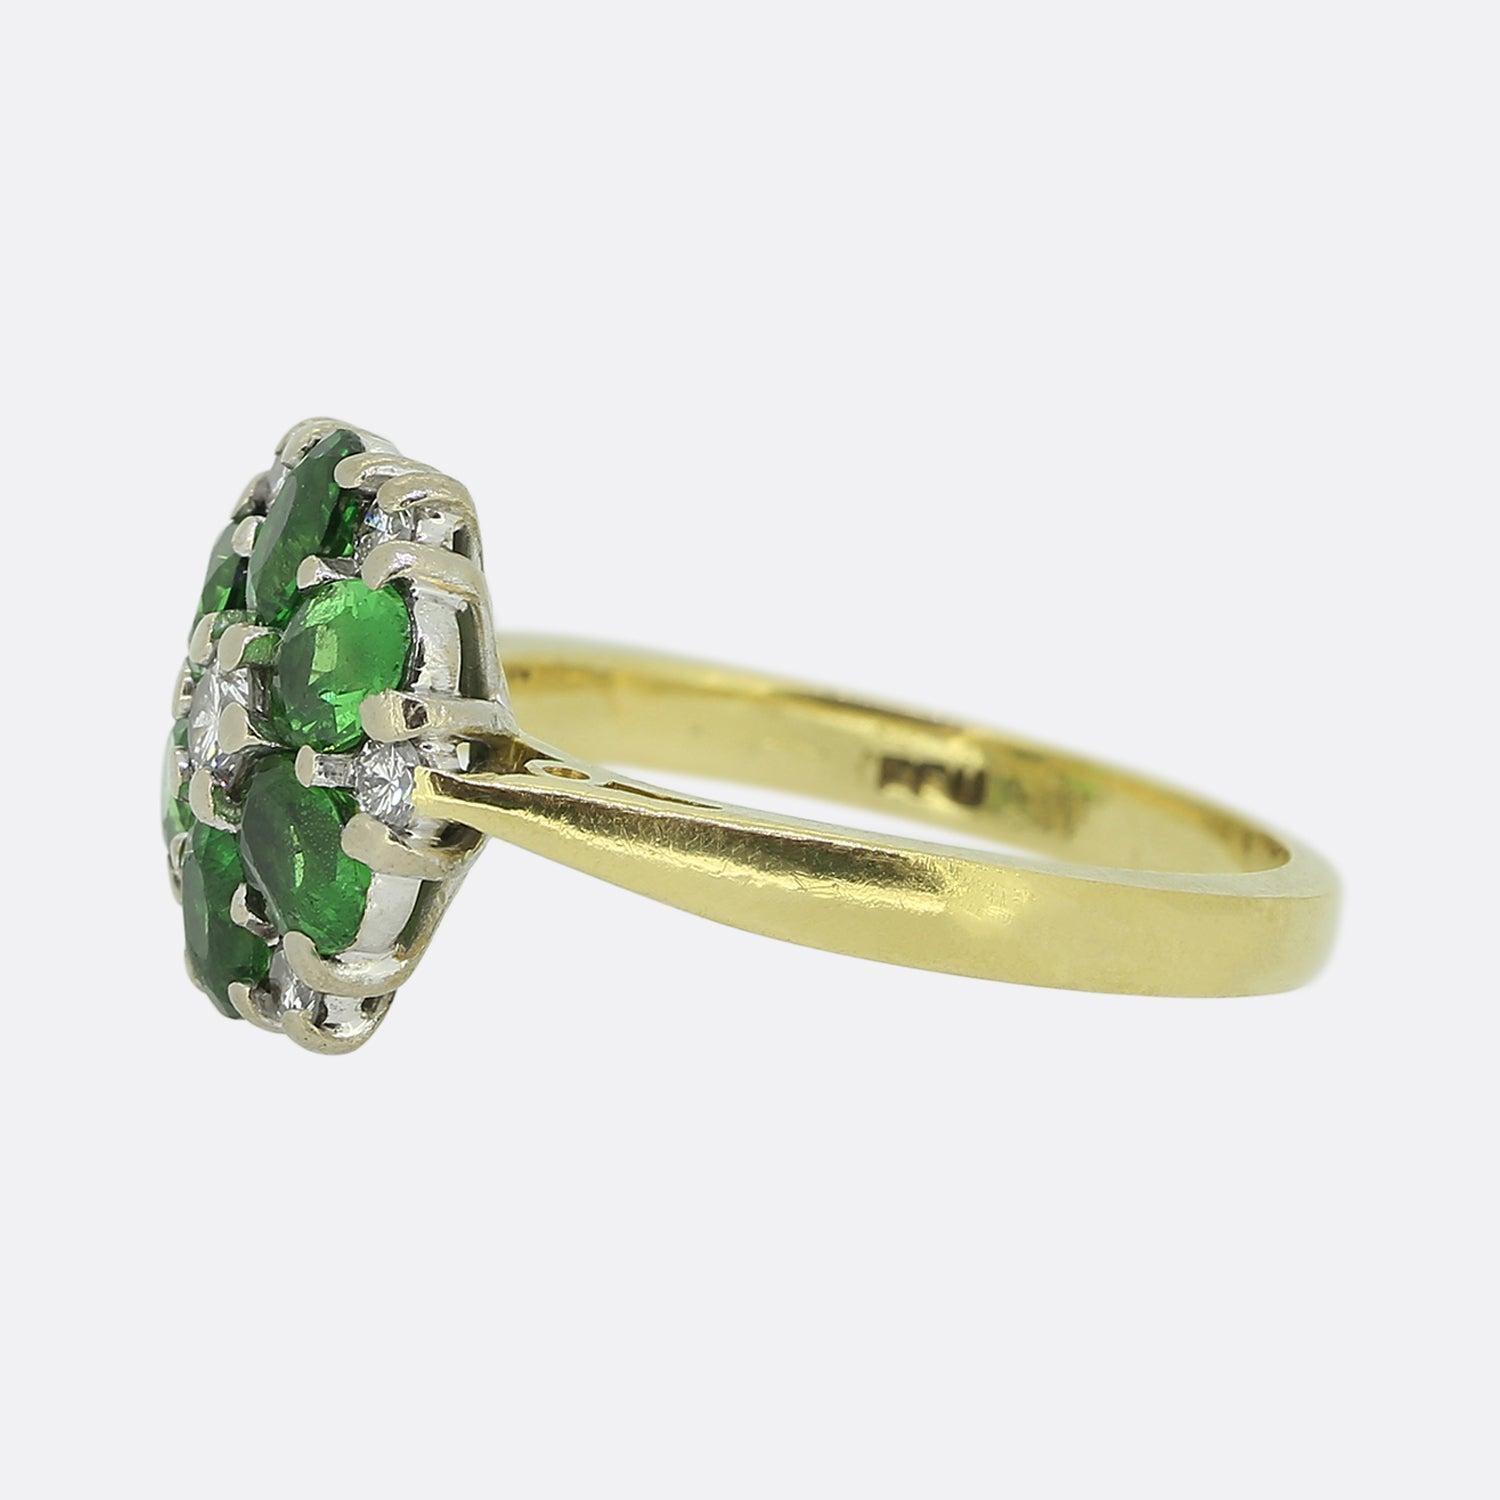 Here we have a delightful garnet and diamond cluster ring. This vintage piece showcases a collection of oval shaped tsavorite garnets in a round formation. These gemstones are perfectly matched and possess an alluring electric green colour tone.